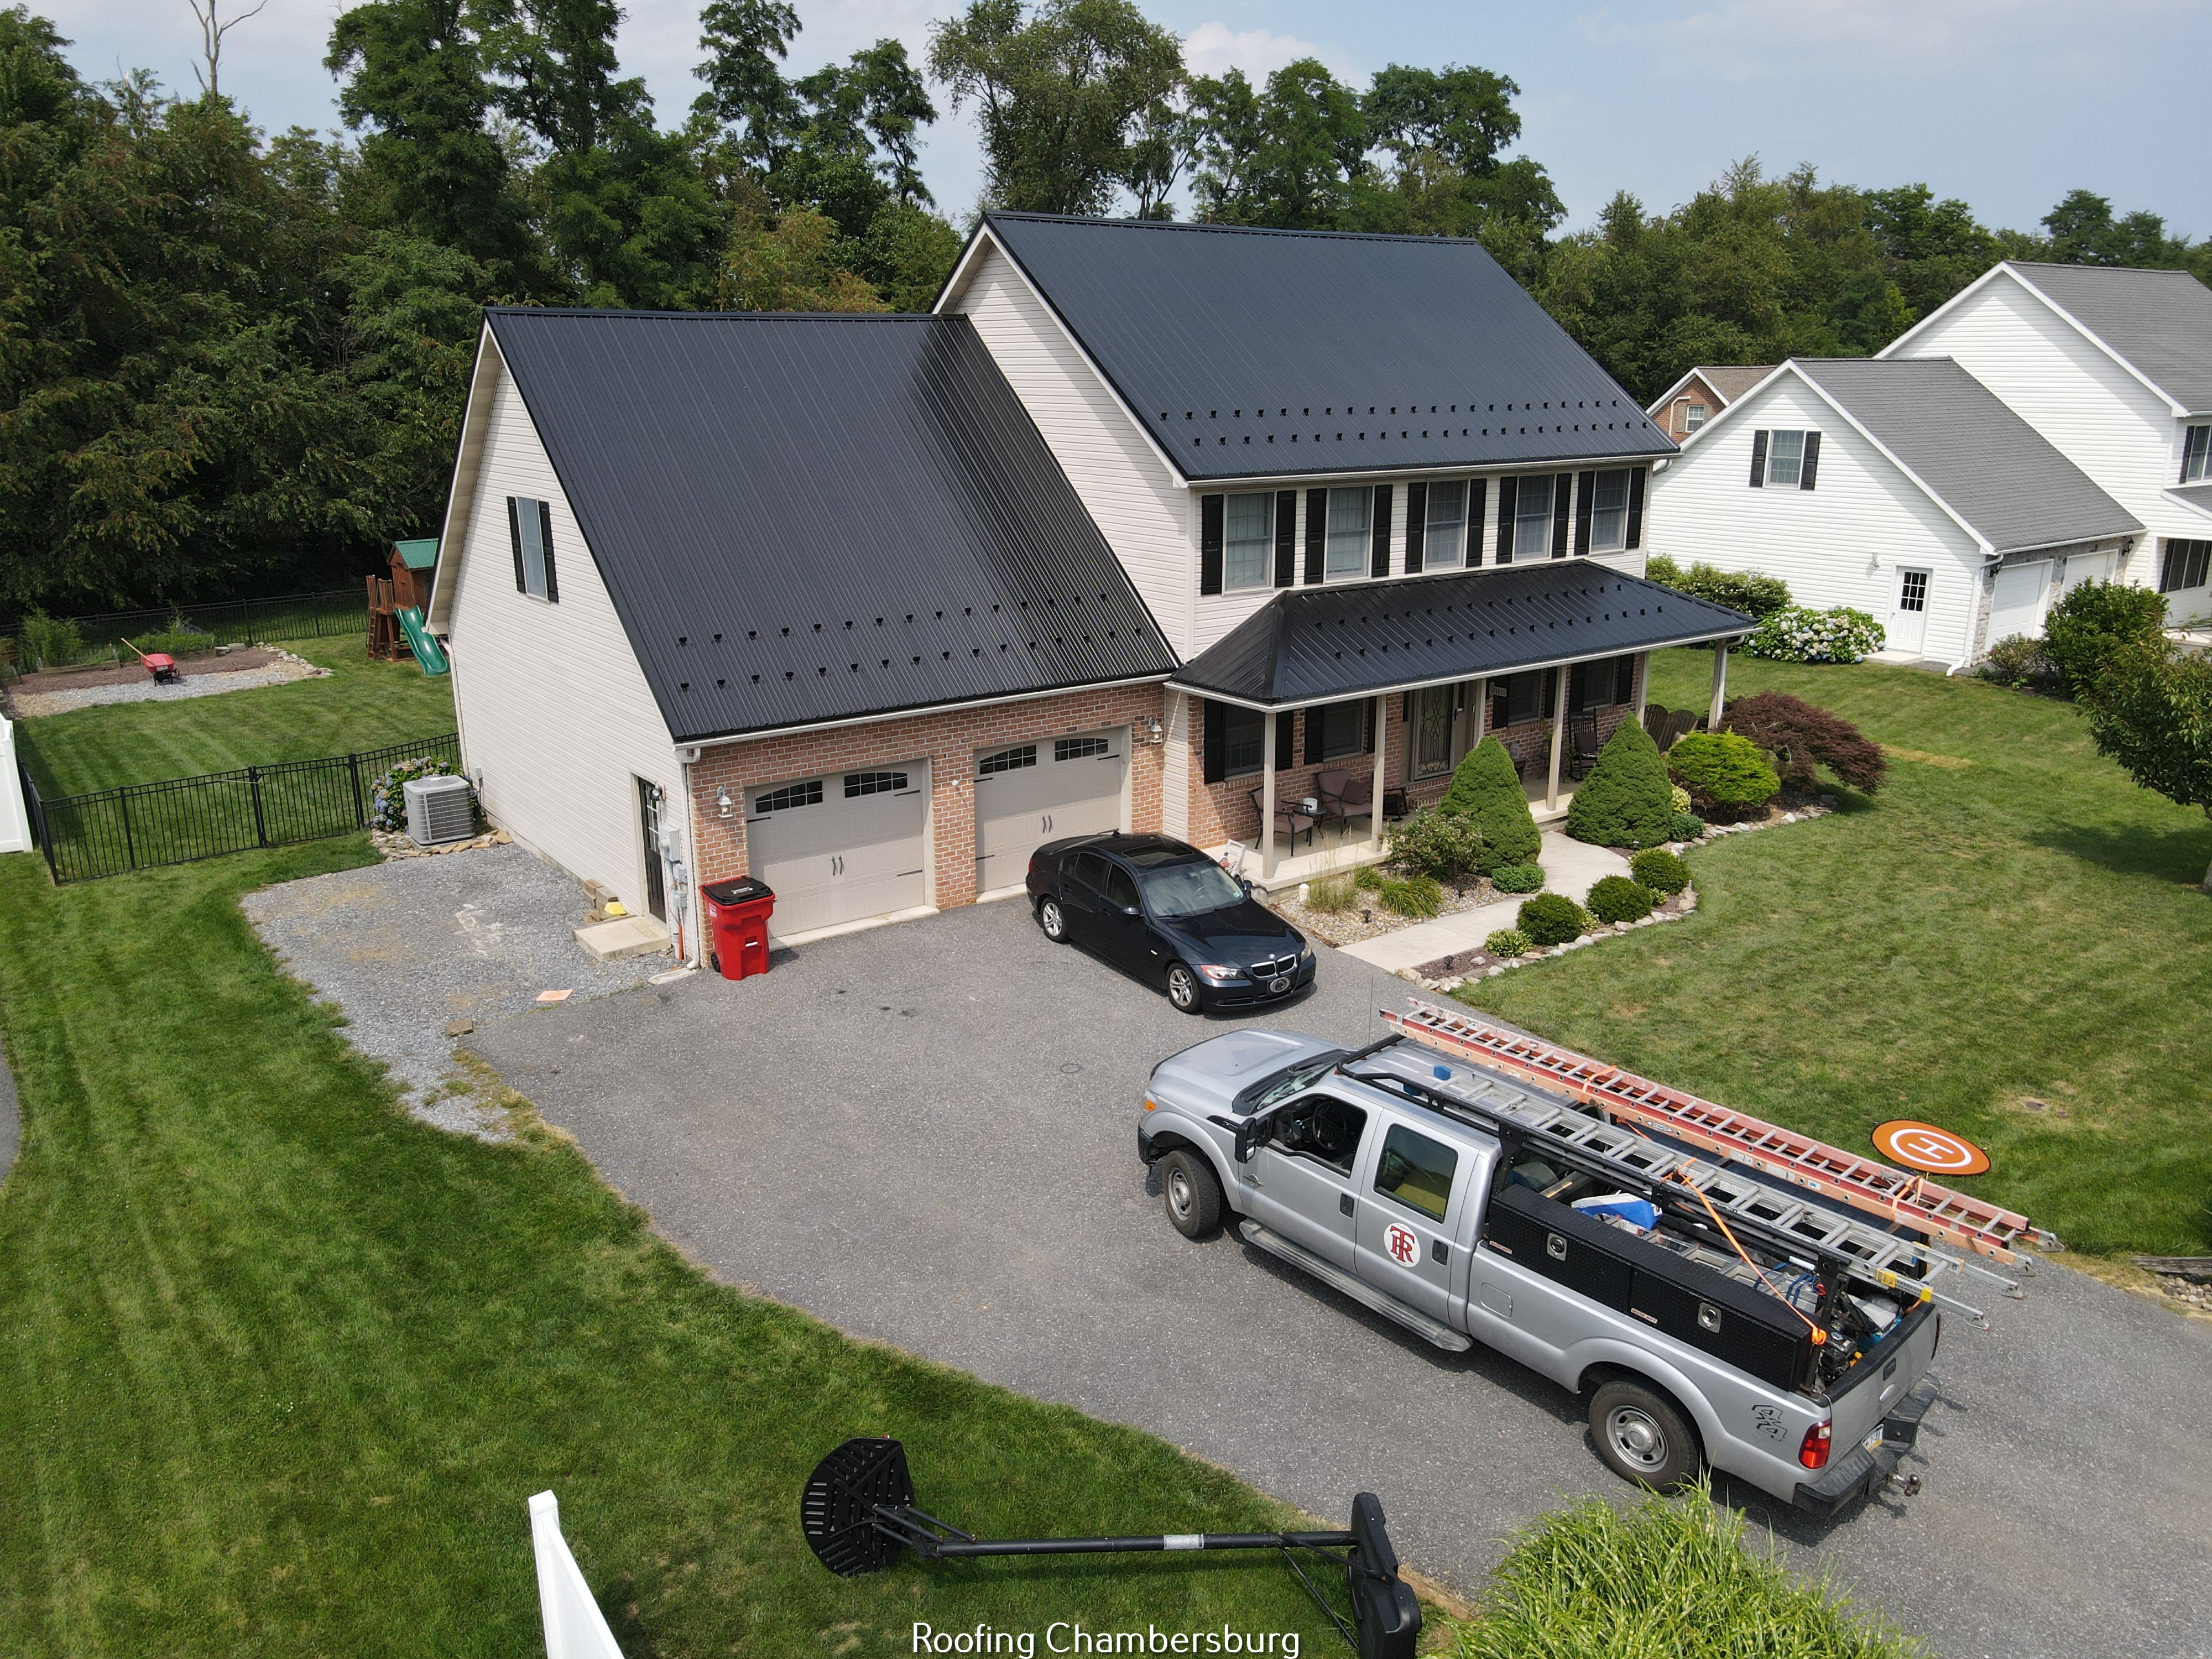 Teflon Roofing Encourages Homeowners to Invest in Architectural Shingles